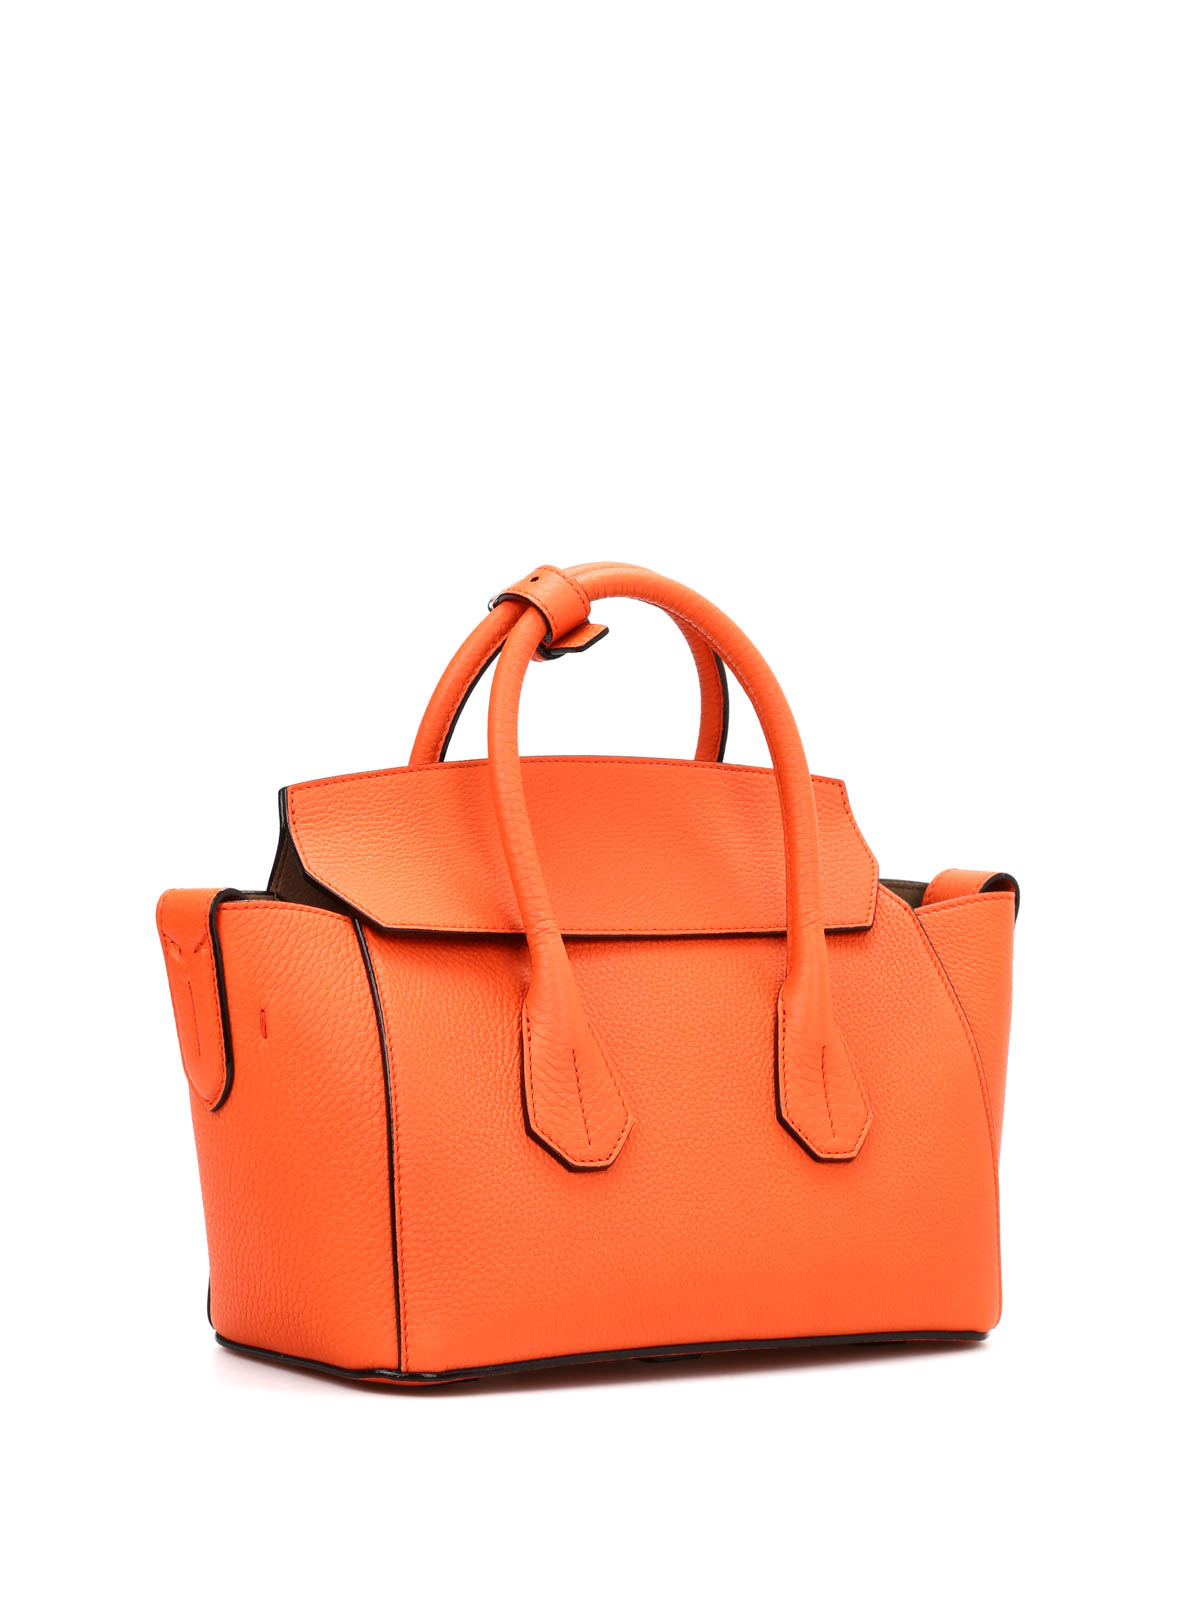 Totes bags Bally - Sommet small leather tote - 6204328 | iKRIX.com